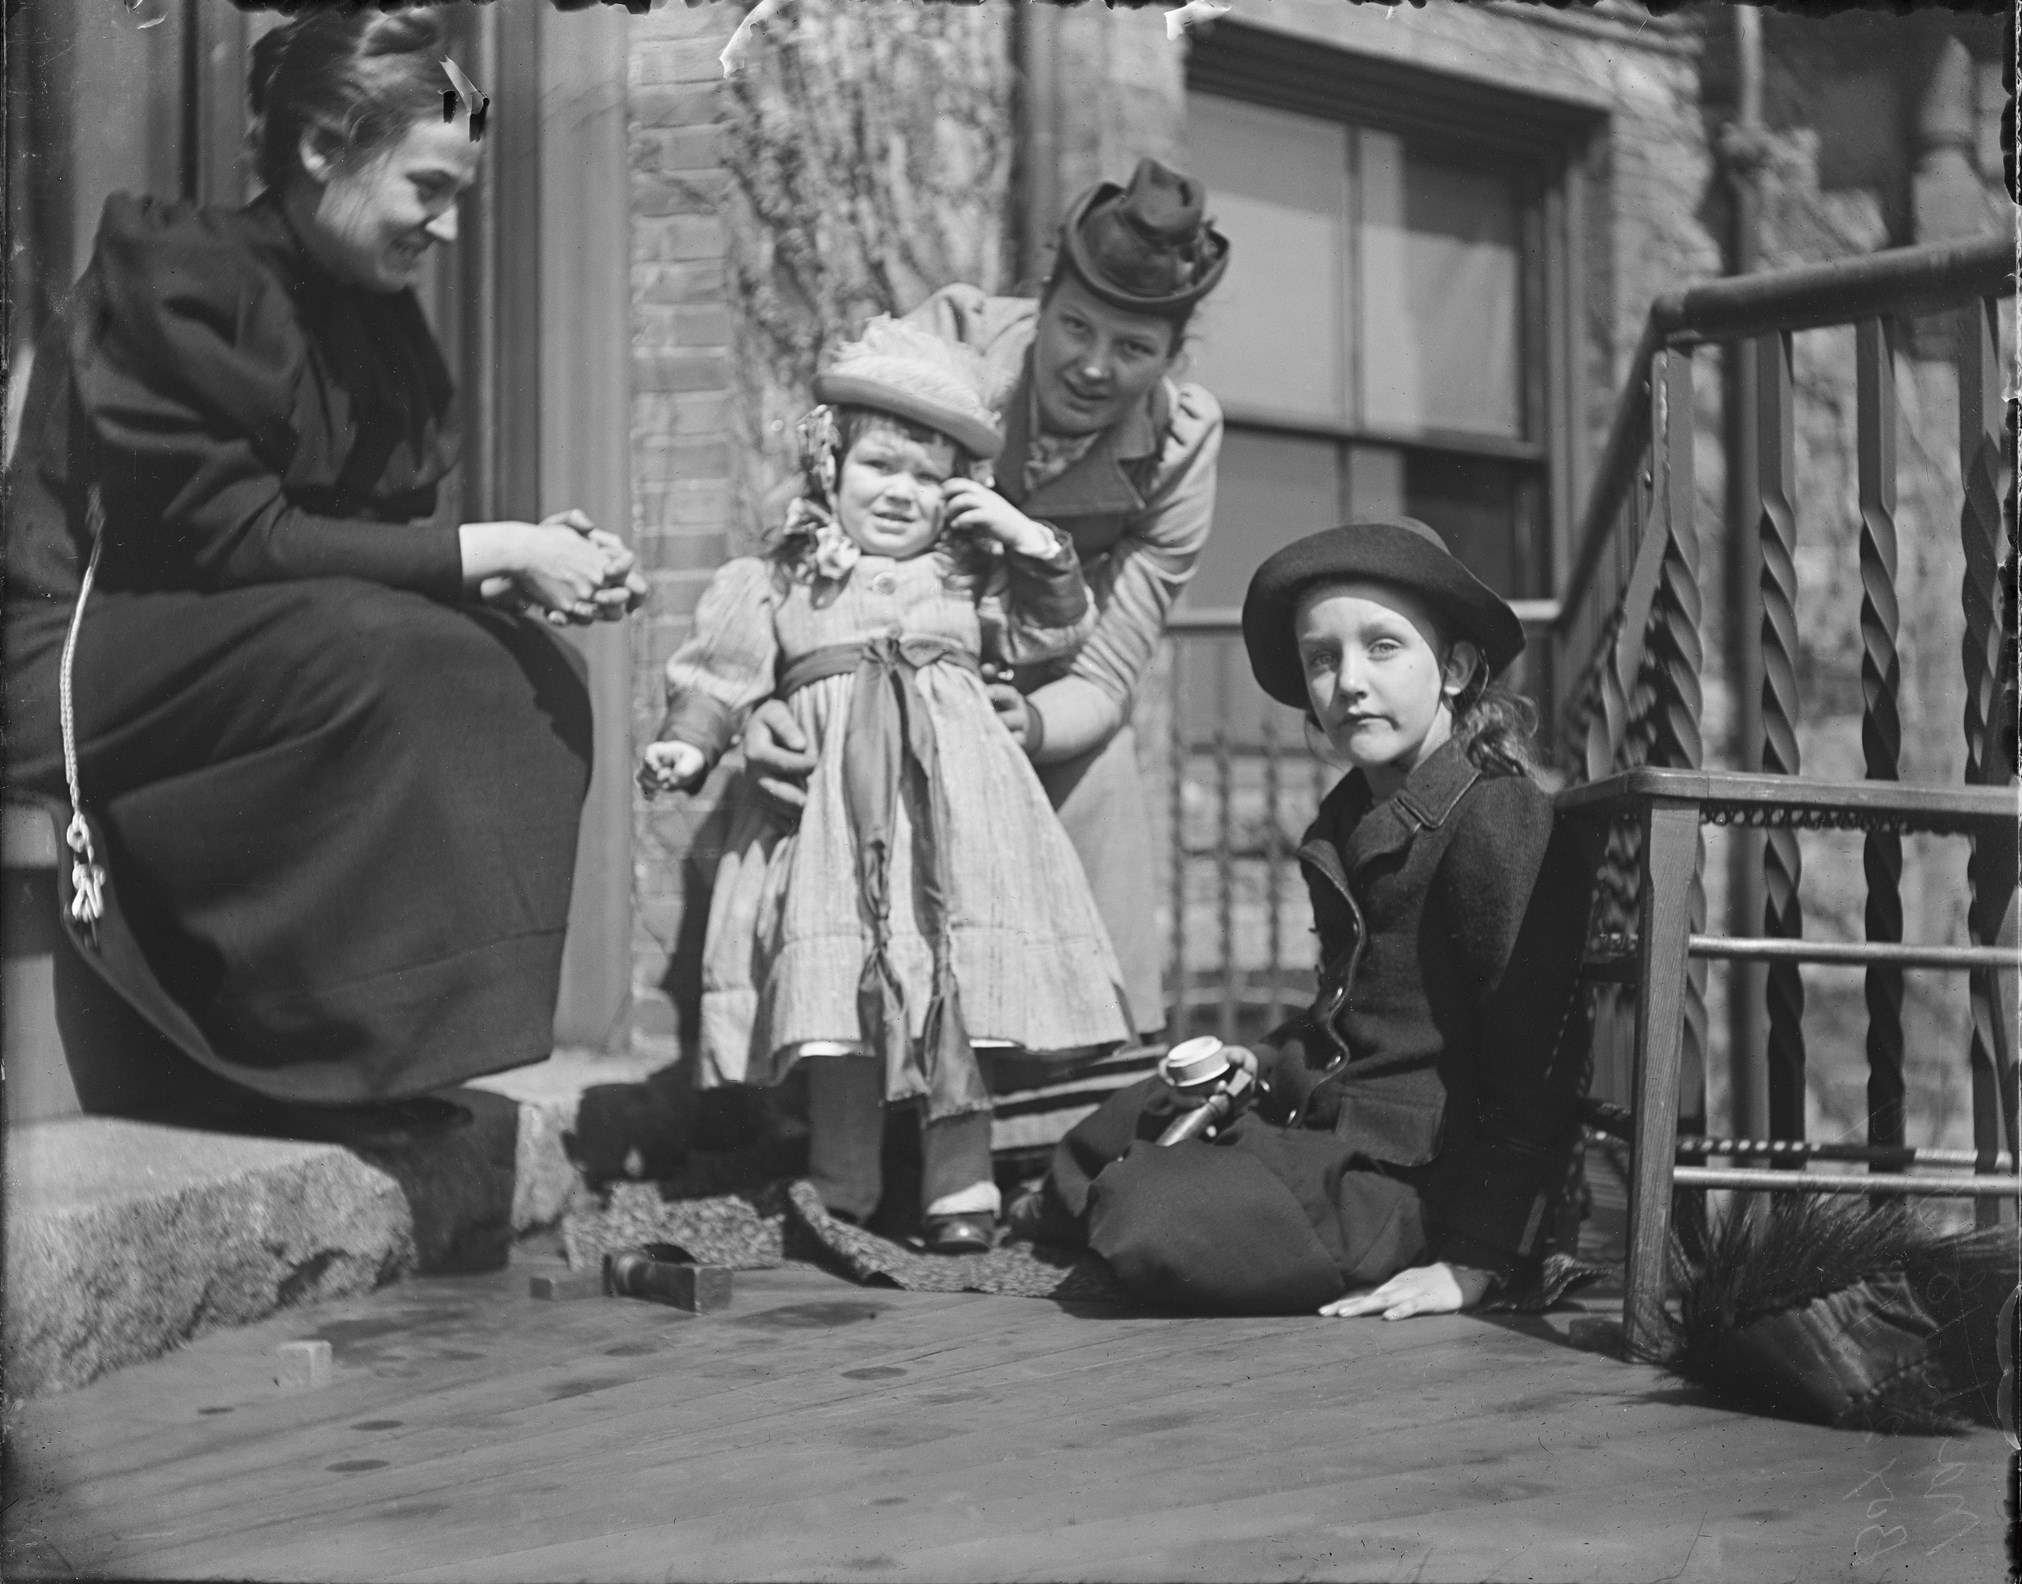 Black and white photograph of seated woman in black dress, standing woman in lighter colored coat and hat, small child in dress and hat, and young girl in dark coat and hat sitting on the balcony.